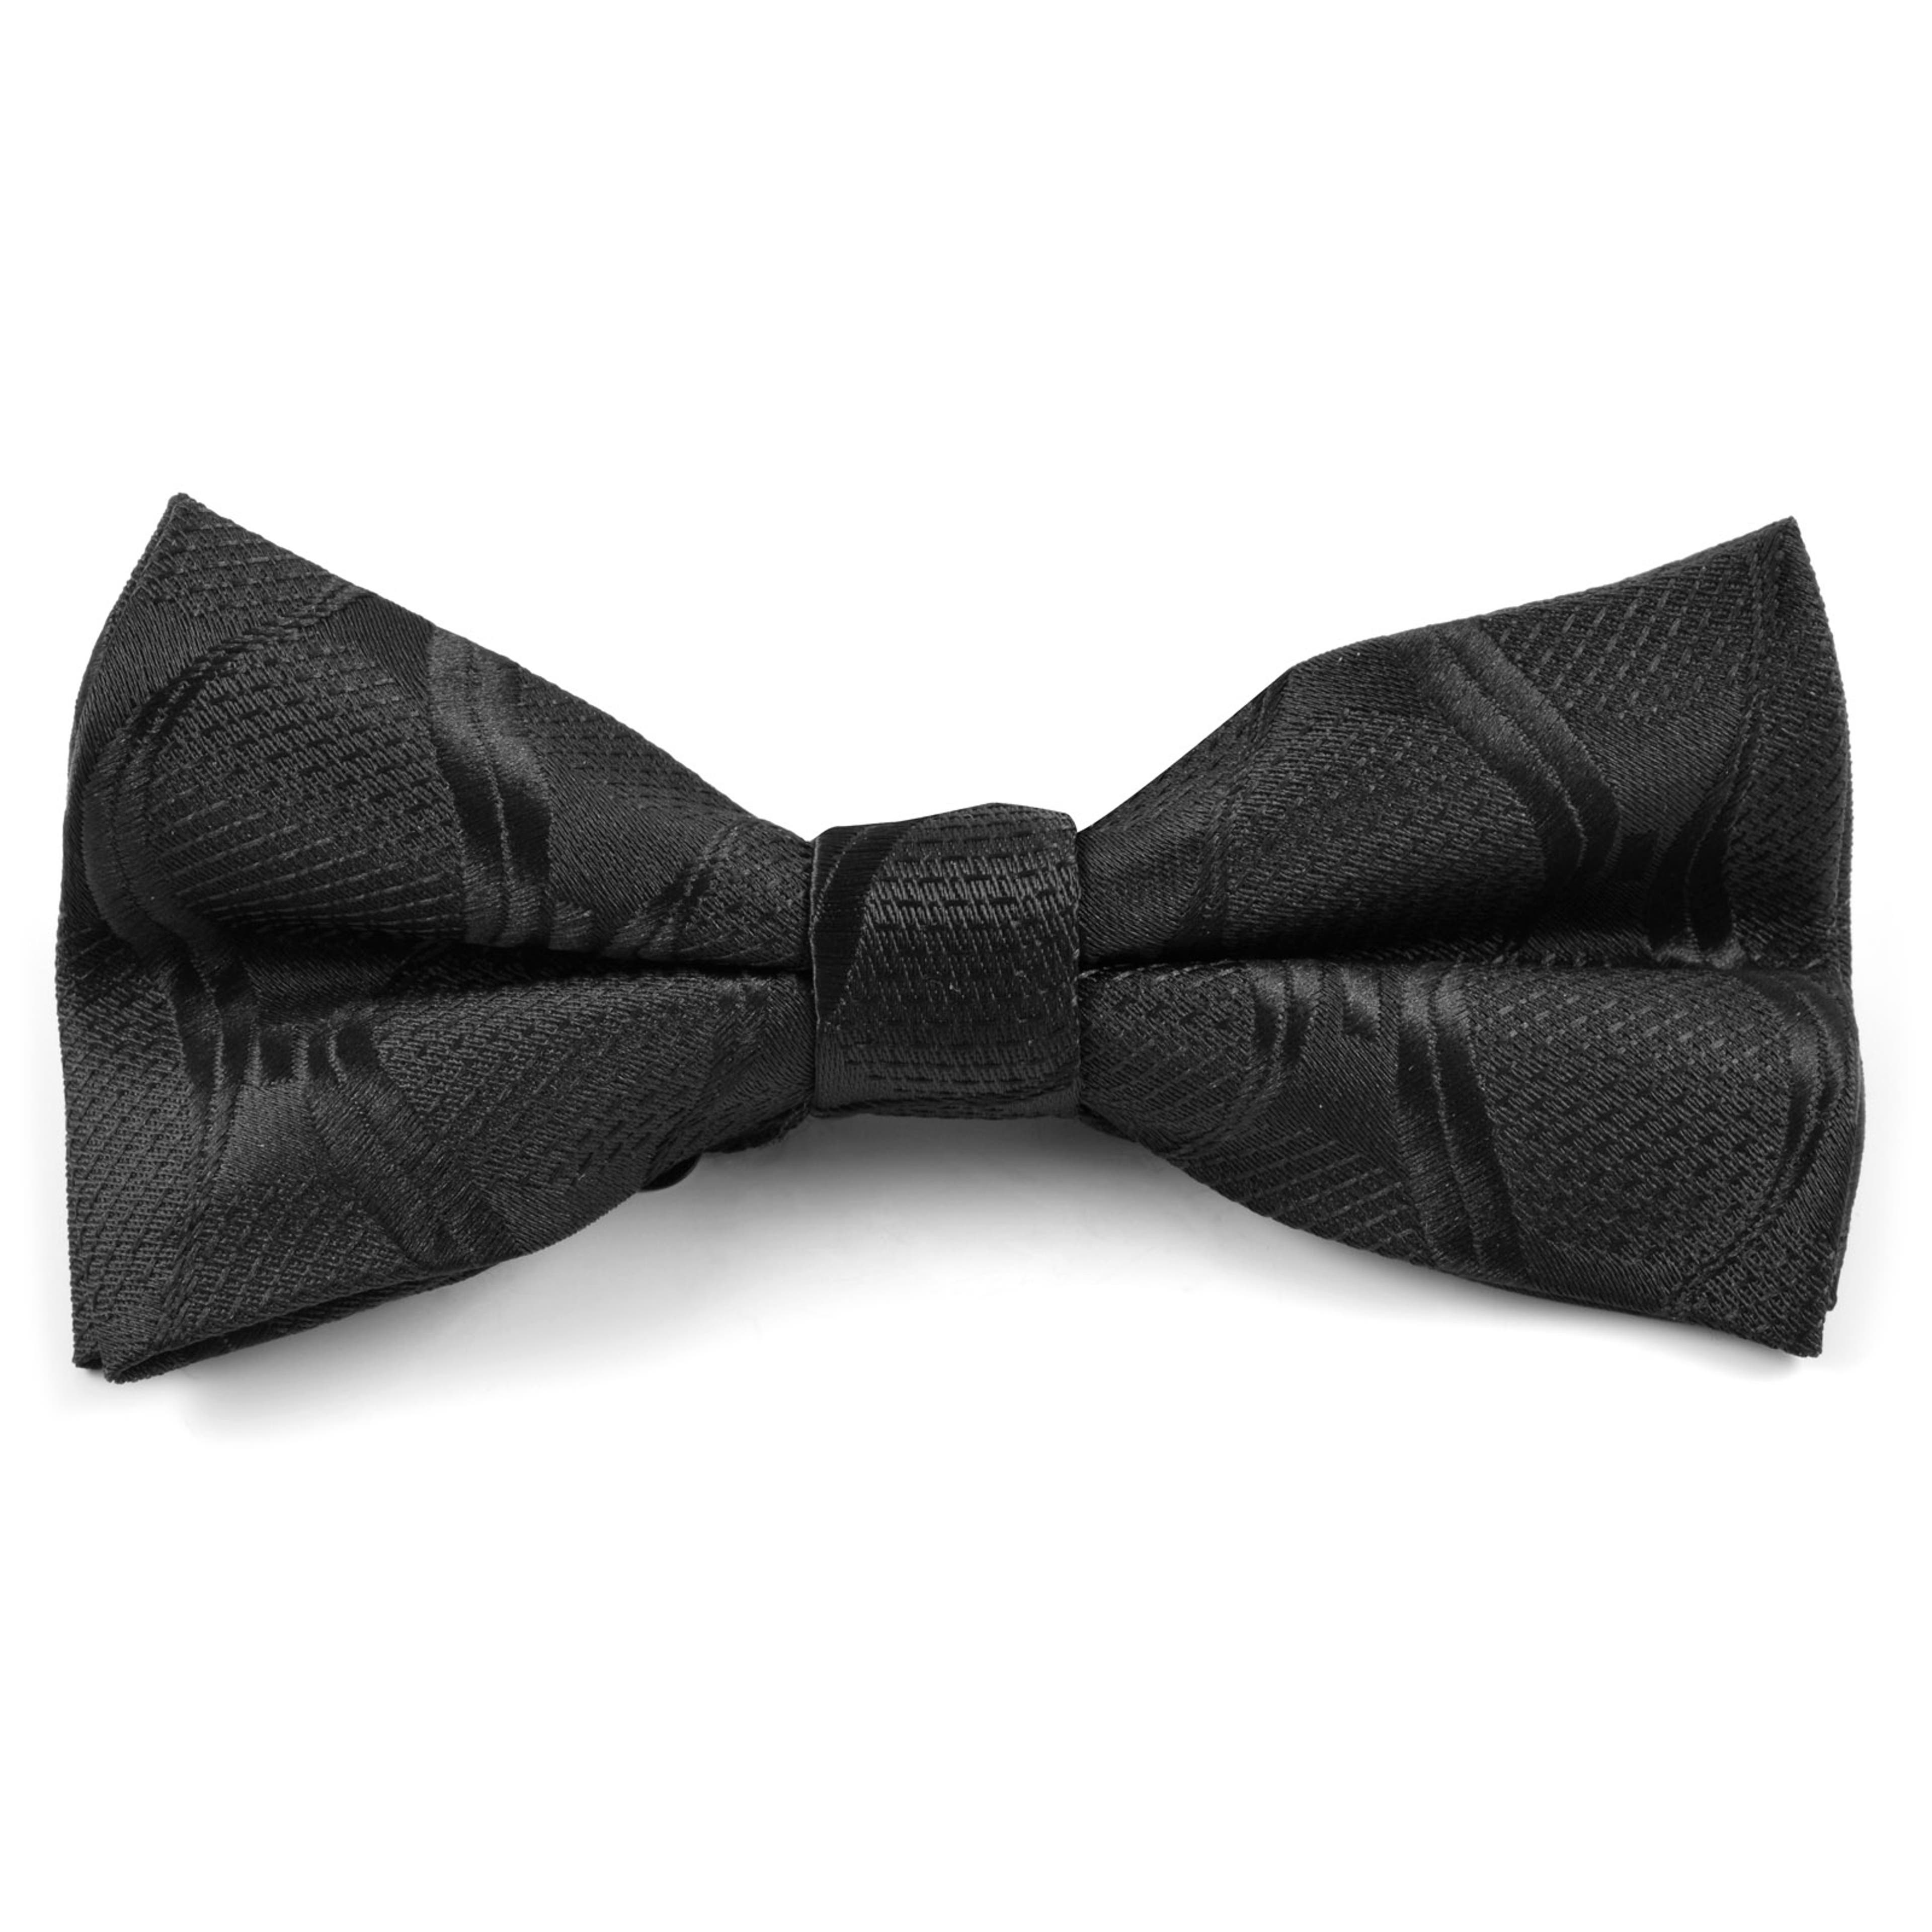 Black Patterned Pre-Tied Bow Tie